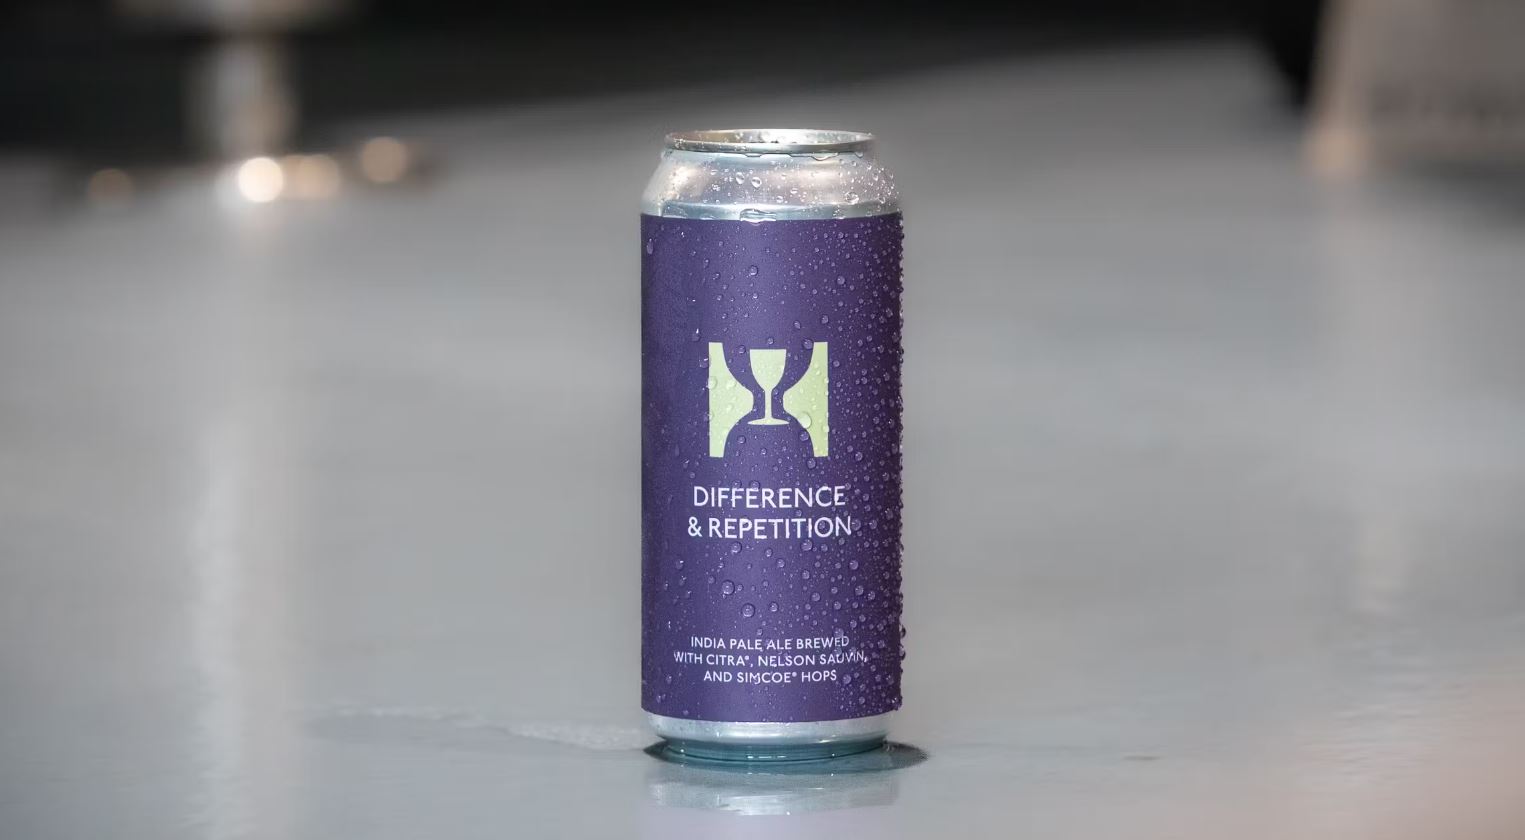 Hill Farmstead Difference & Repetition